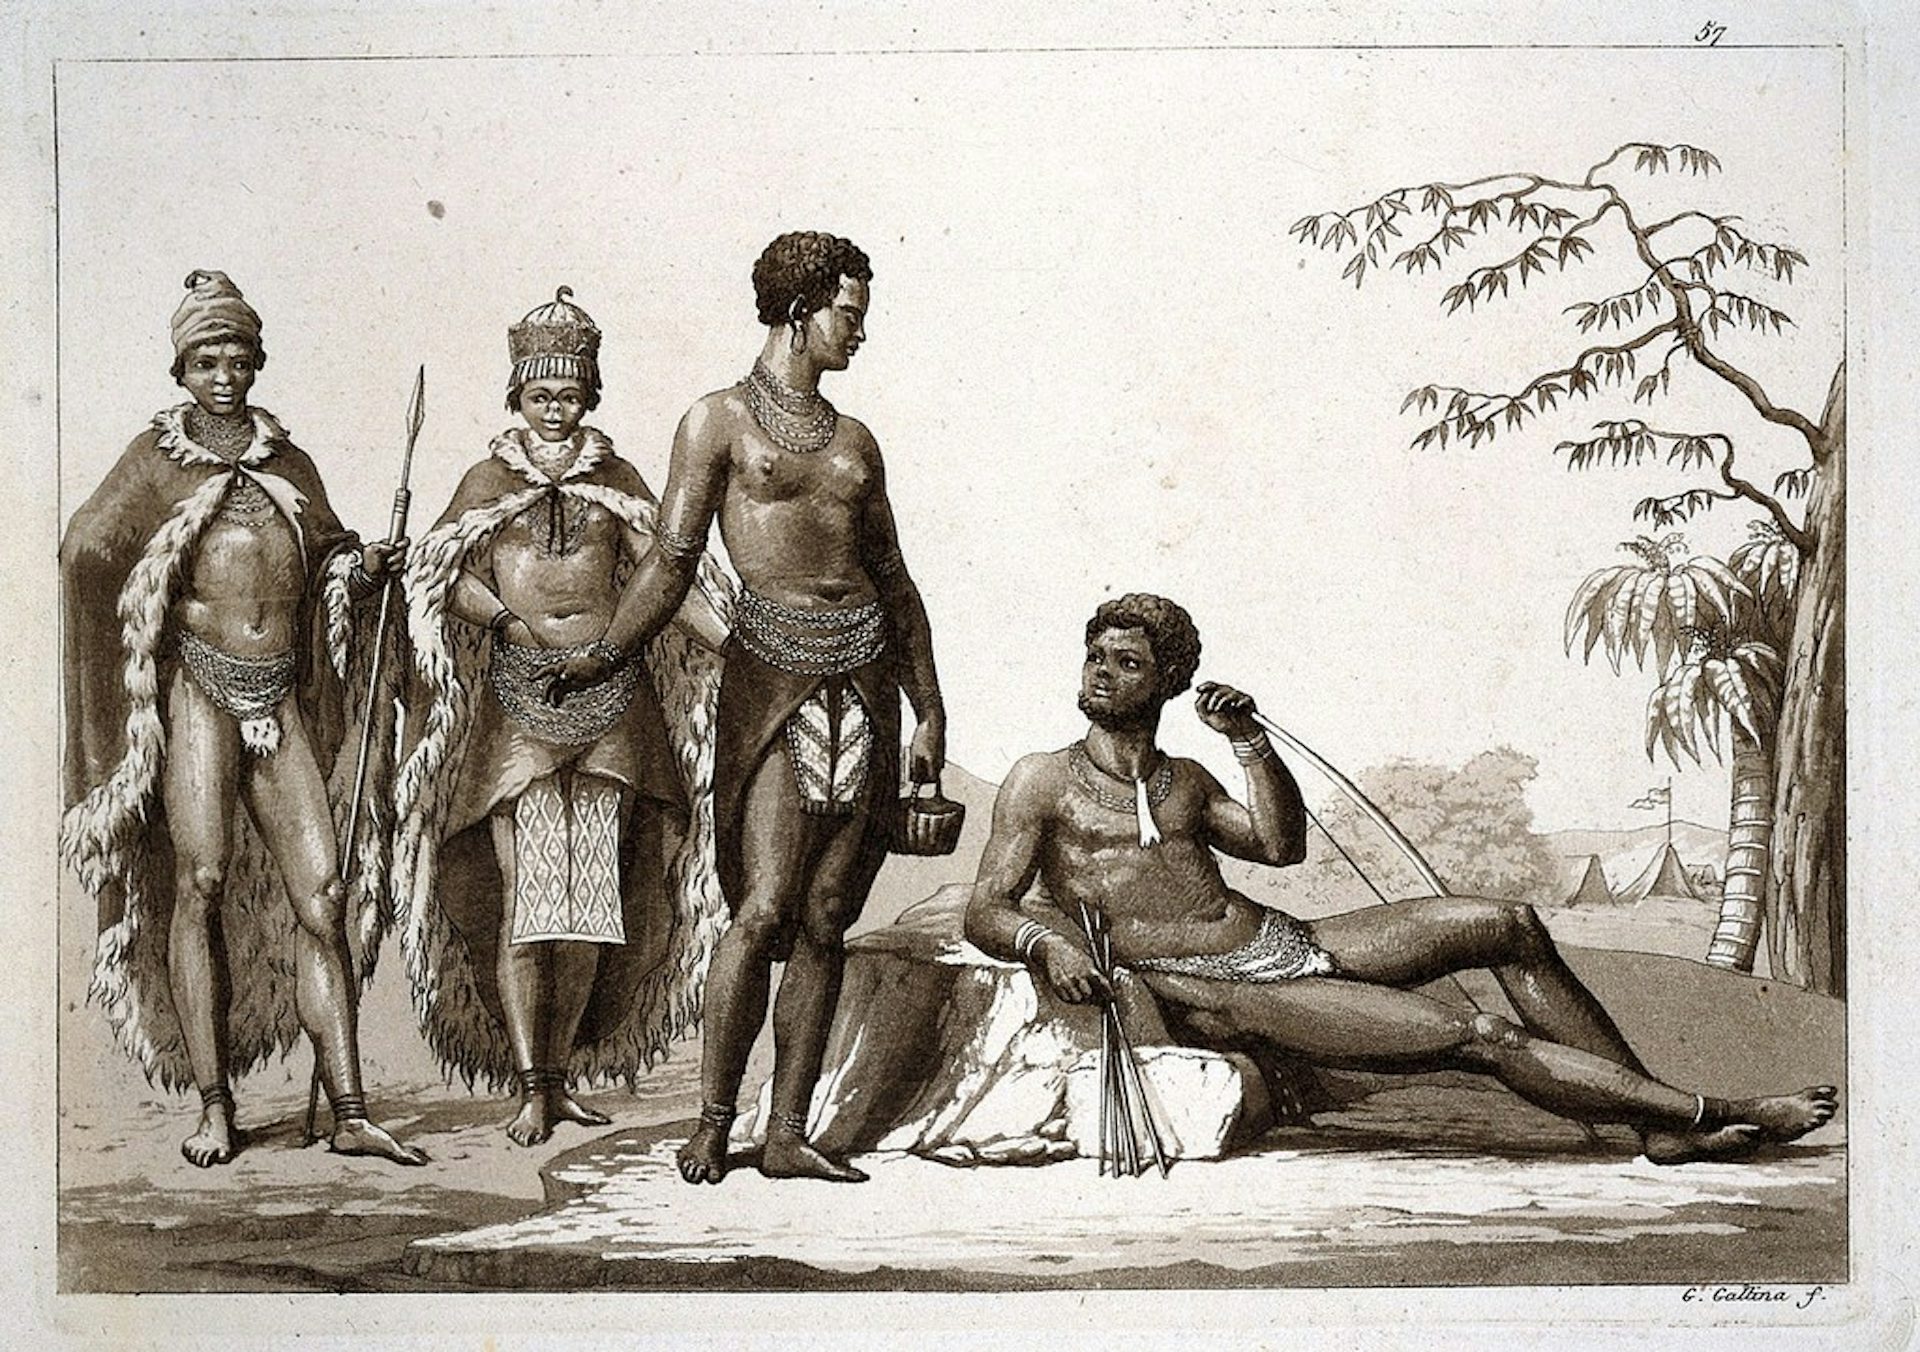 Khoi people of the Gonaqua kingdom, southern Africa by G. Gallina, (c.1819).